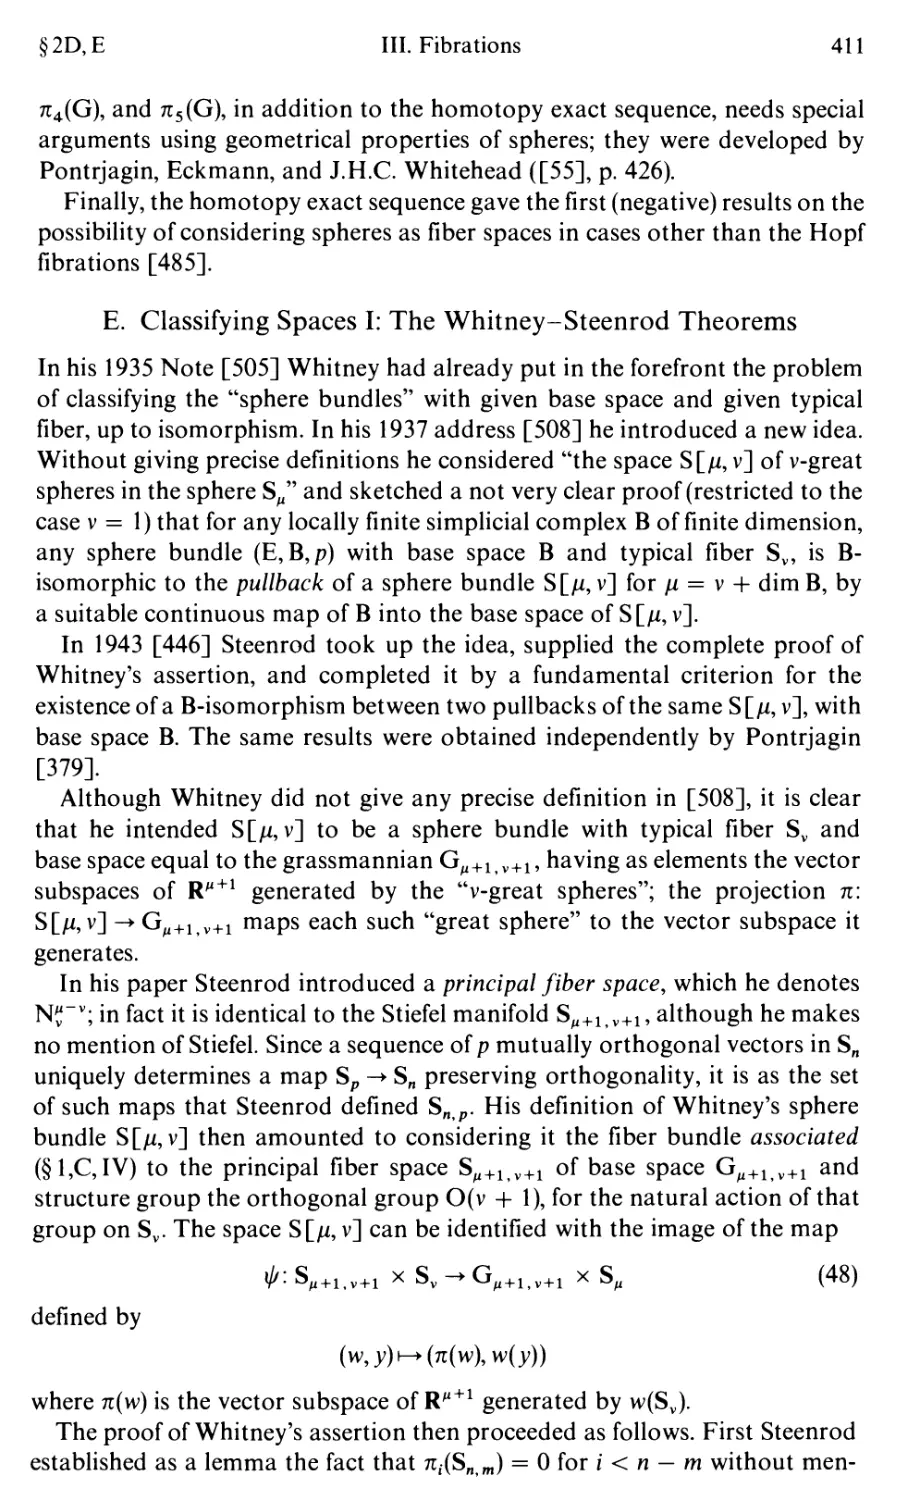 E. Classifying Spaces: I. The Whitney-Steenrod Theorems